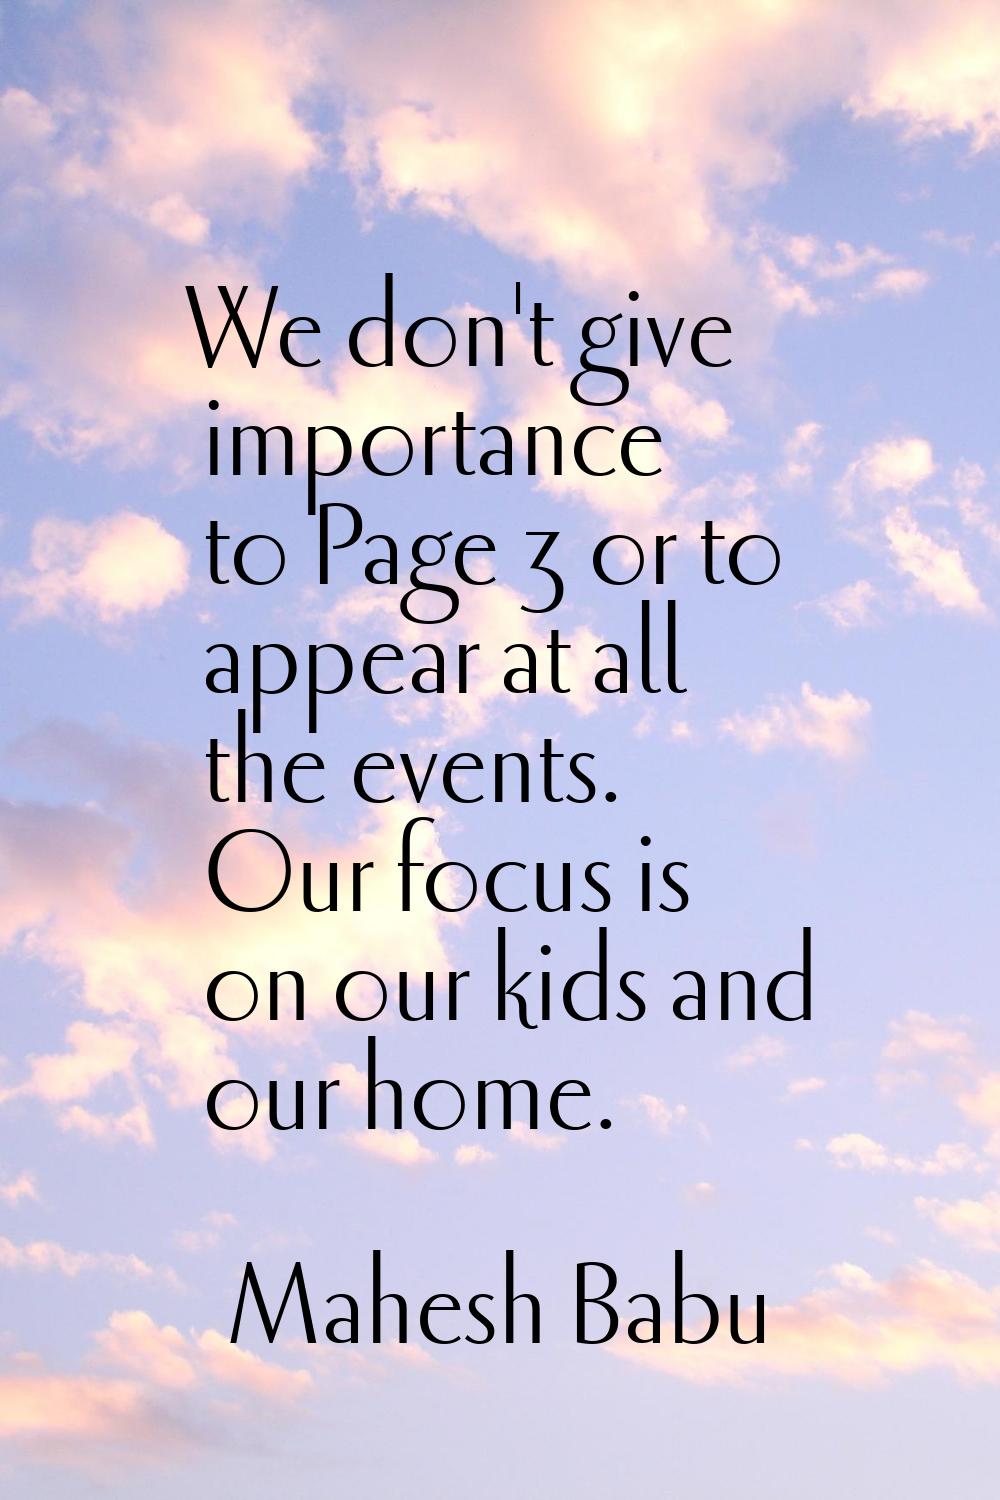 We don't give importance to Page 3 or to appear at all the events. Our focus is on our kids and our